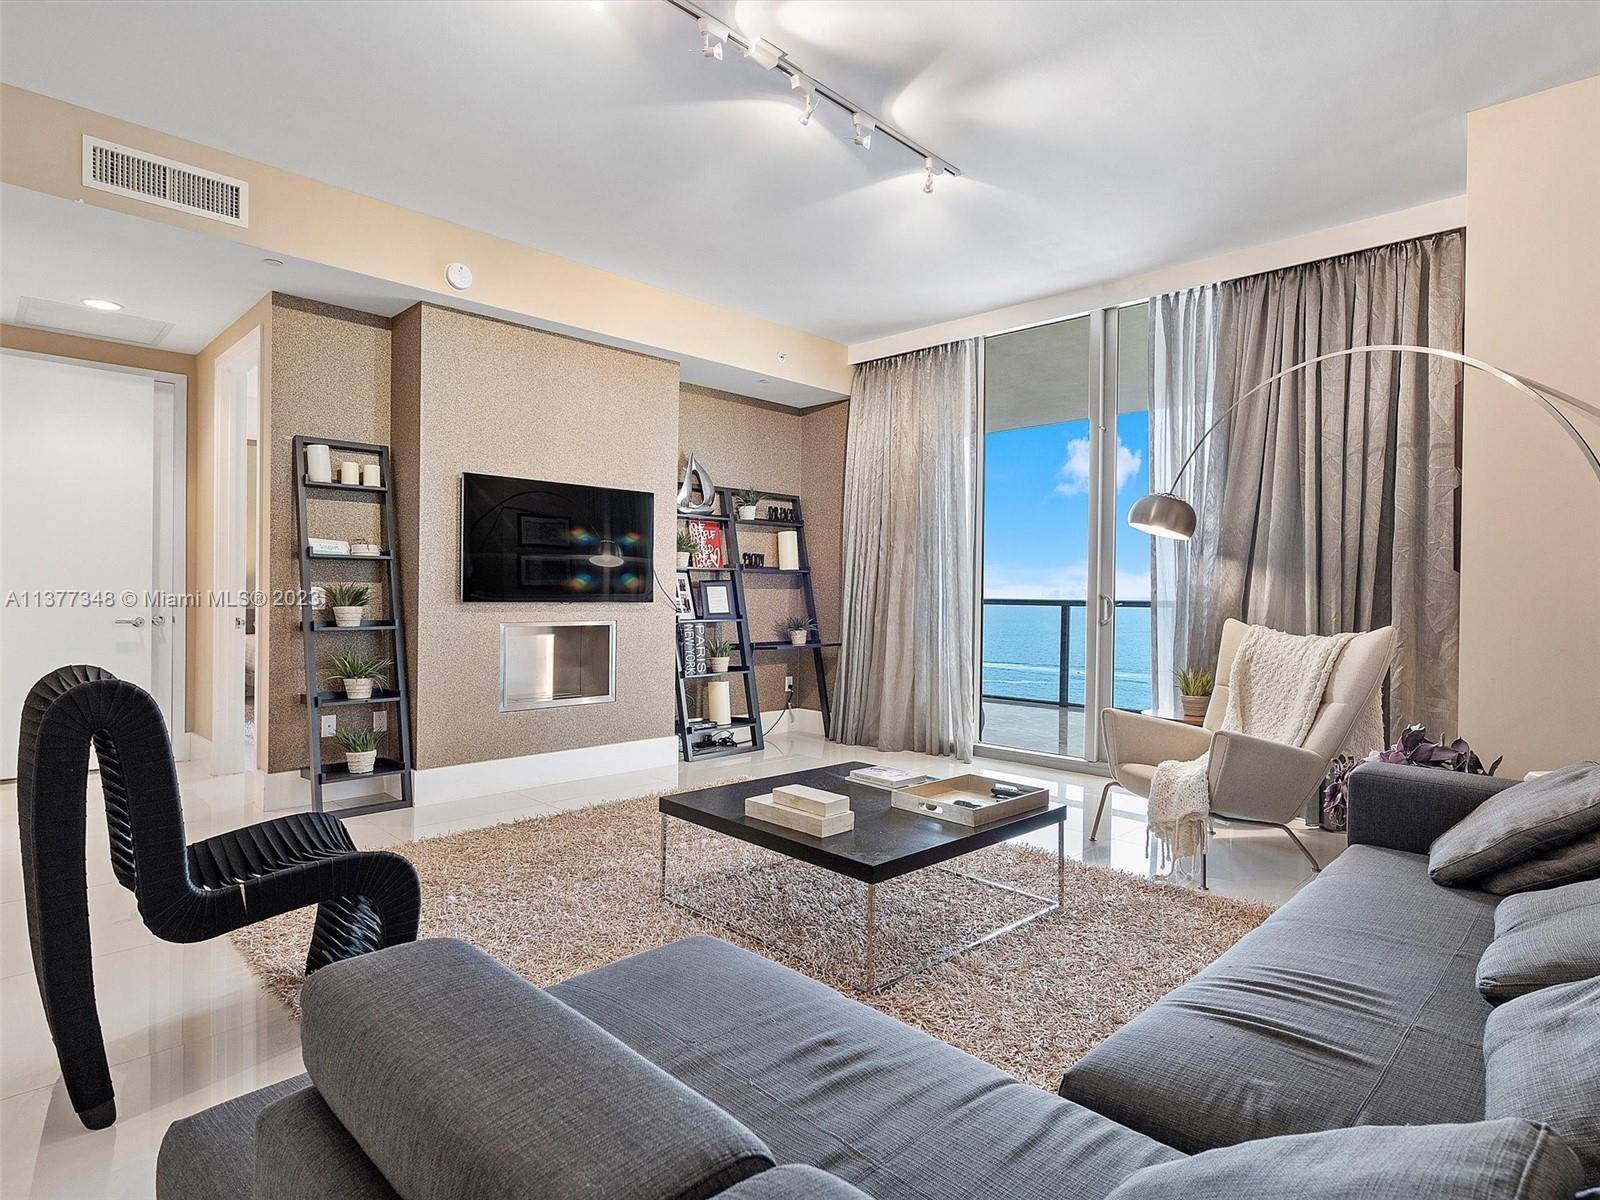 furnished, 2 beds, 2 1 2 Baths with direct ocean view.